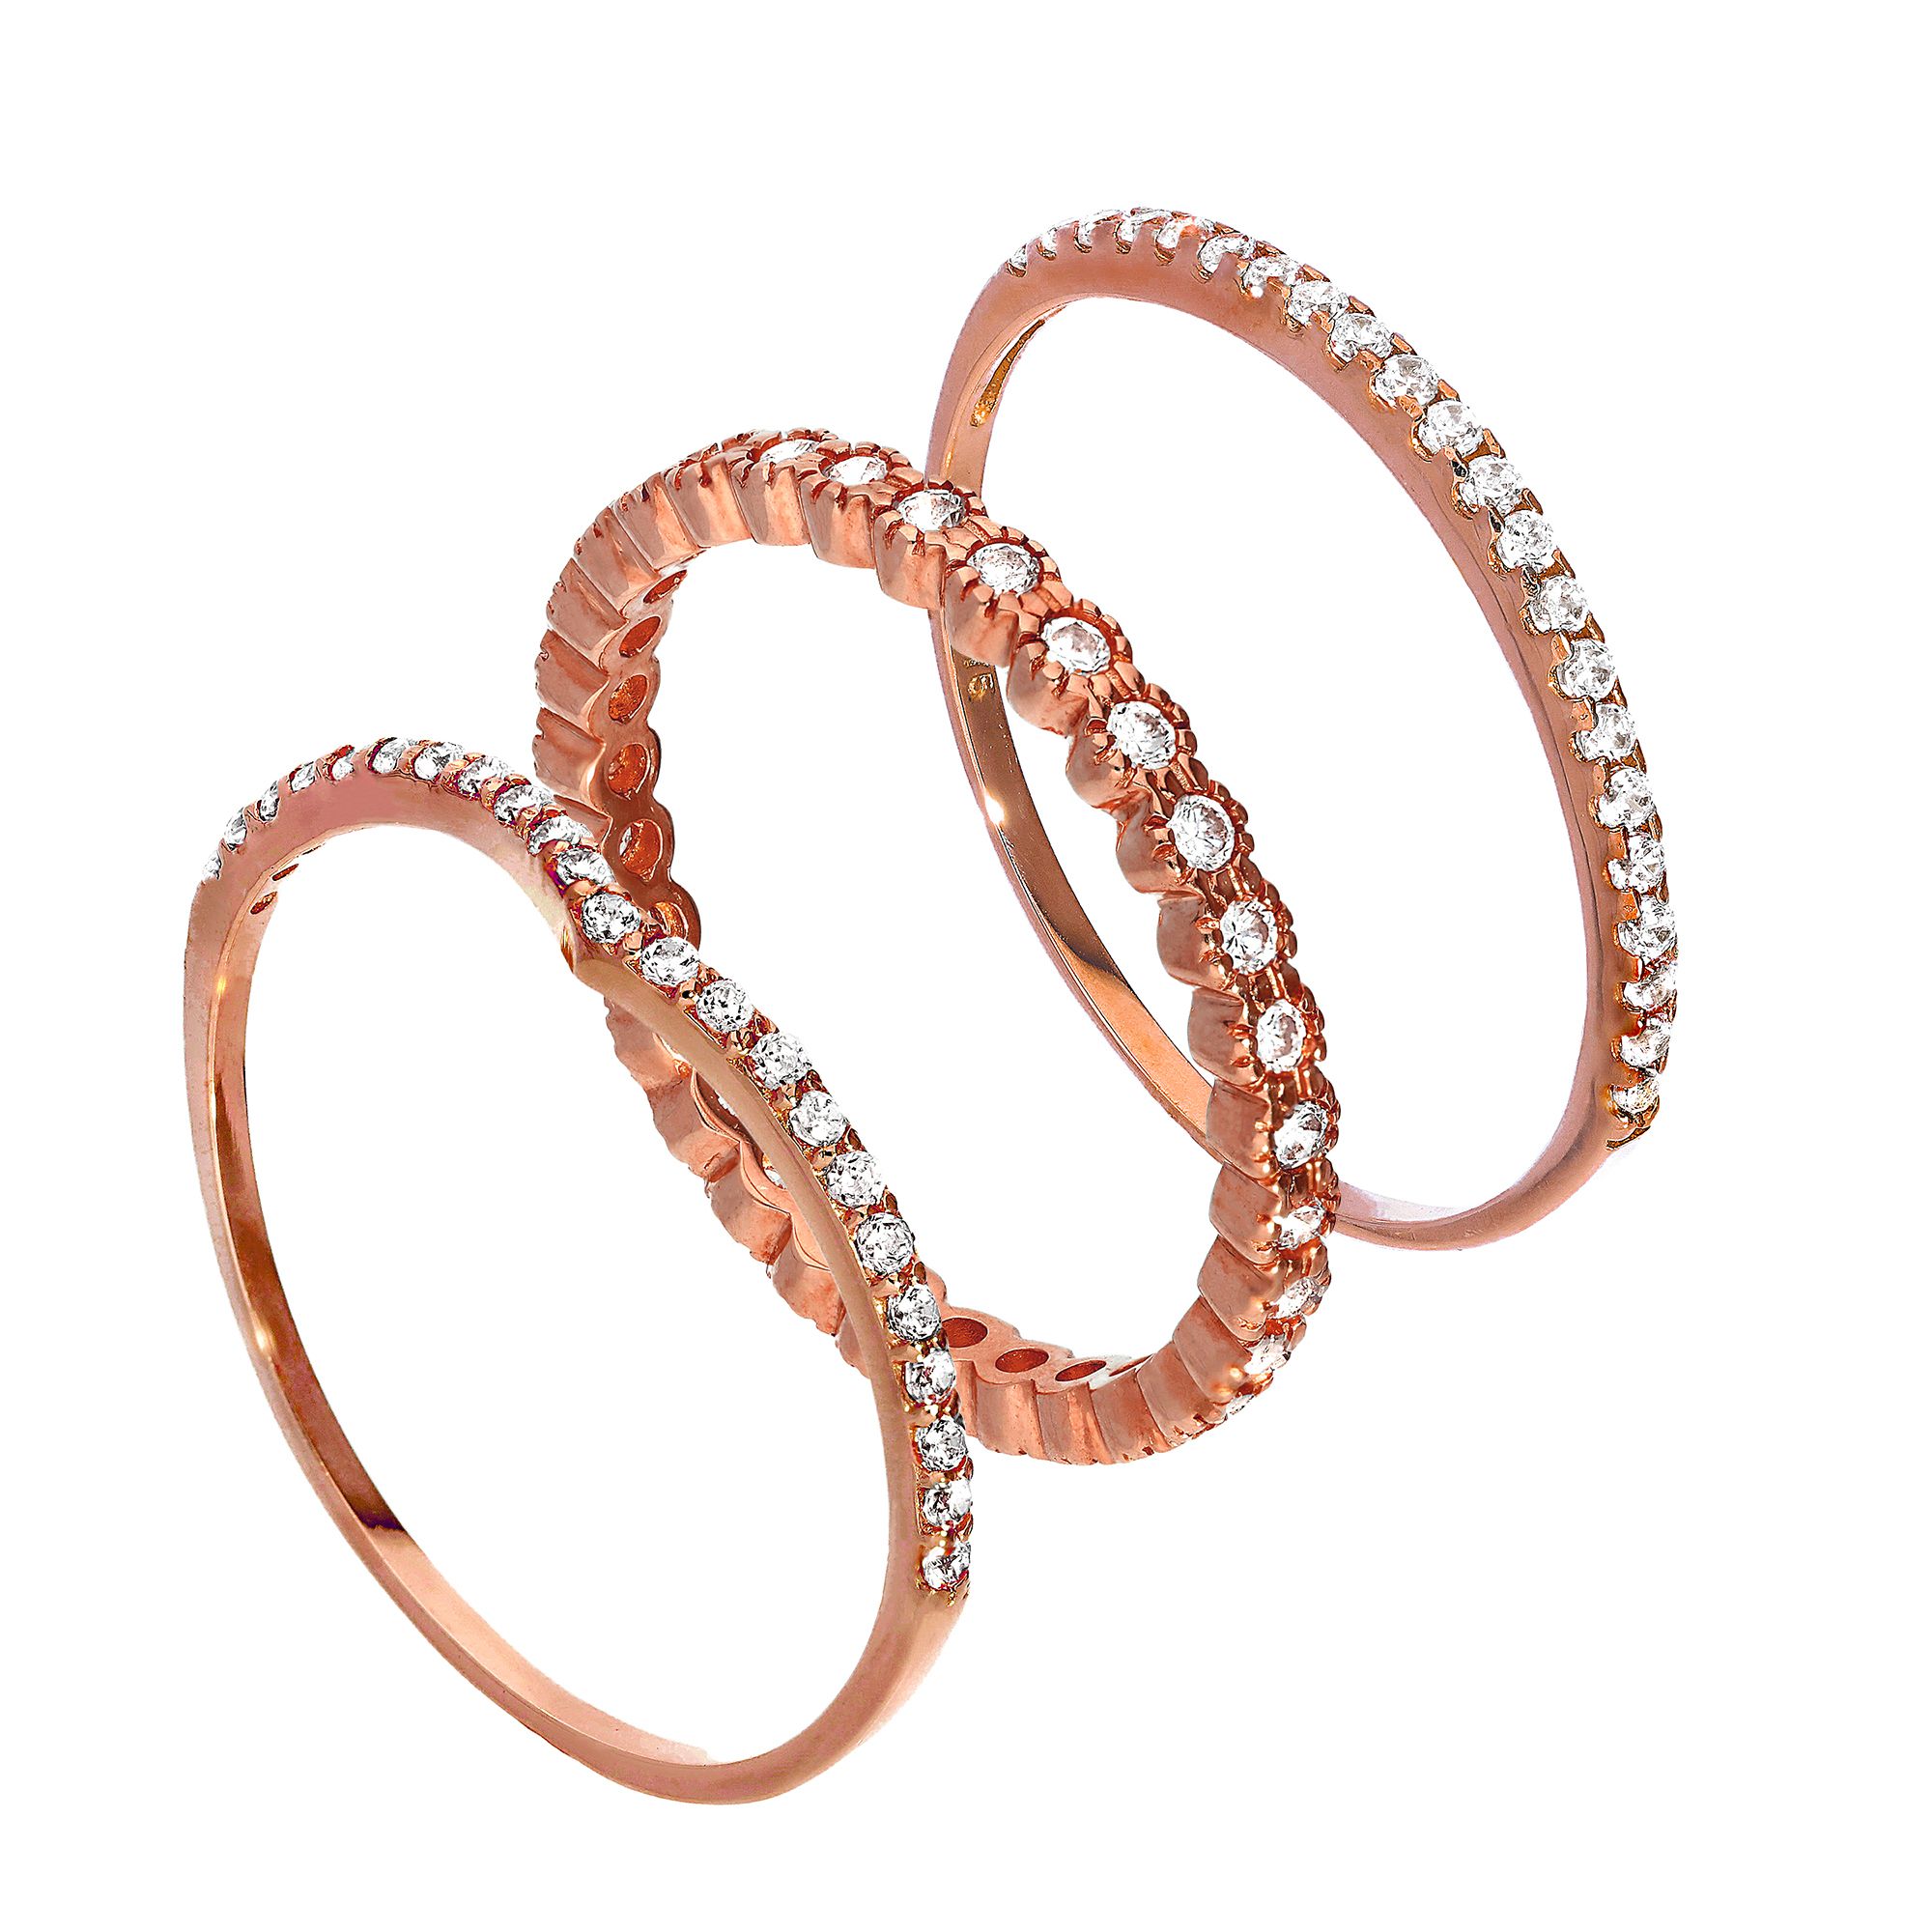 Details About 9ct Rose Gold Wishbone & Eternity Cz Sparkle Stacking Rings  Set Valentines Love Regarding 2017 Sparkling Wishbone Rings (View 13 of 25)